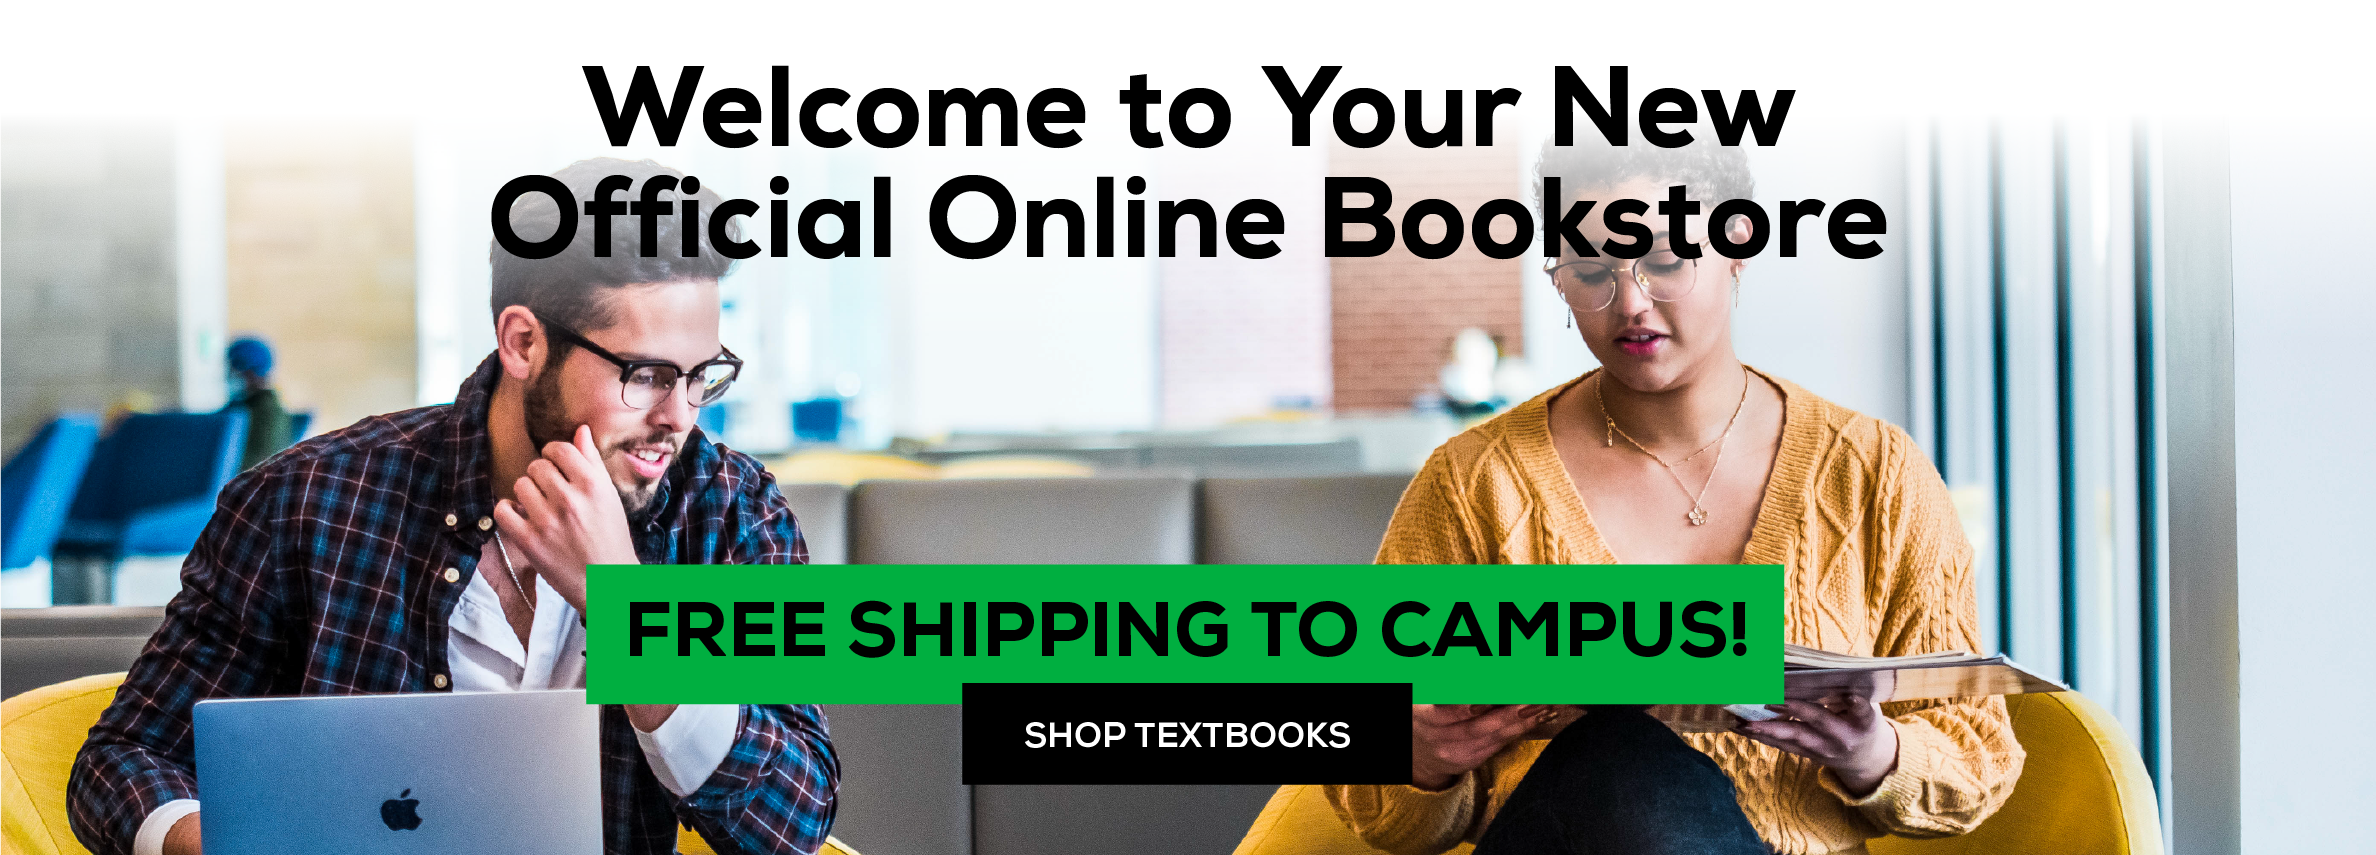 Welcome to Your Official Online Bookstore! Free Shipping to Campus! Shop Textbooks